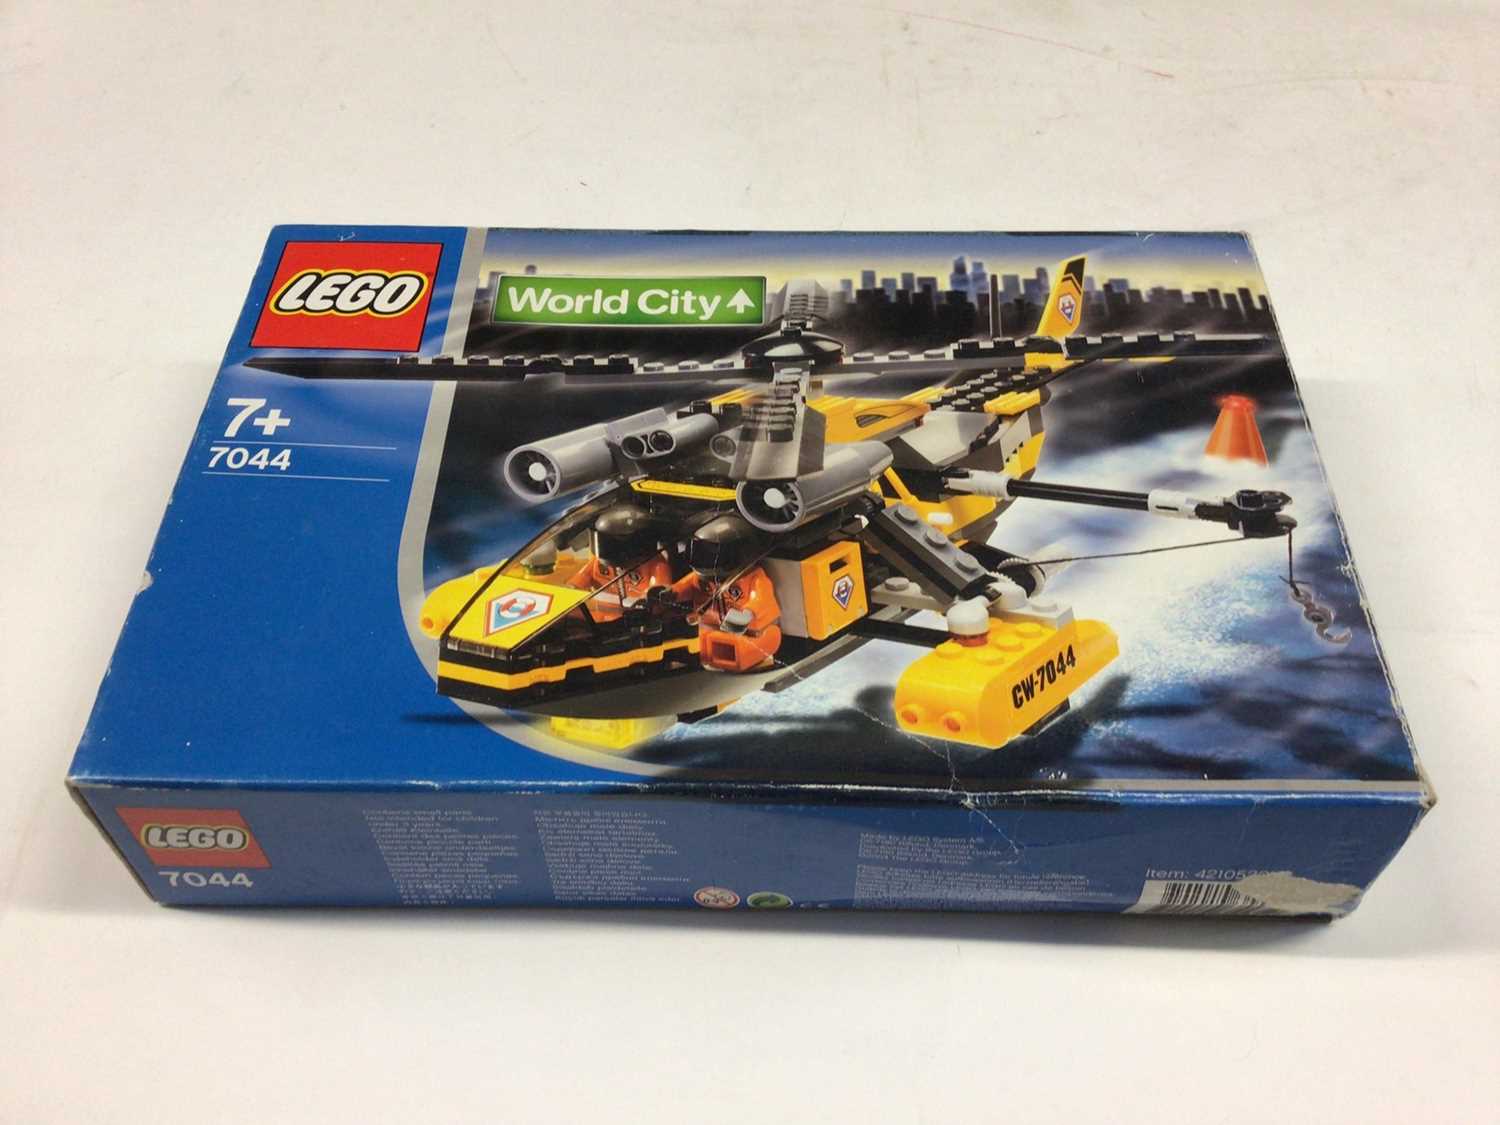 Lot 9 - Lego 7286 Police Bundle, 3180 Tank Truck, 7991 Carbarge Truck, 7044 Coastguard Helicopter, 60042 City Bundle, all including minifigs and instructions, Boxed